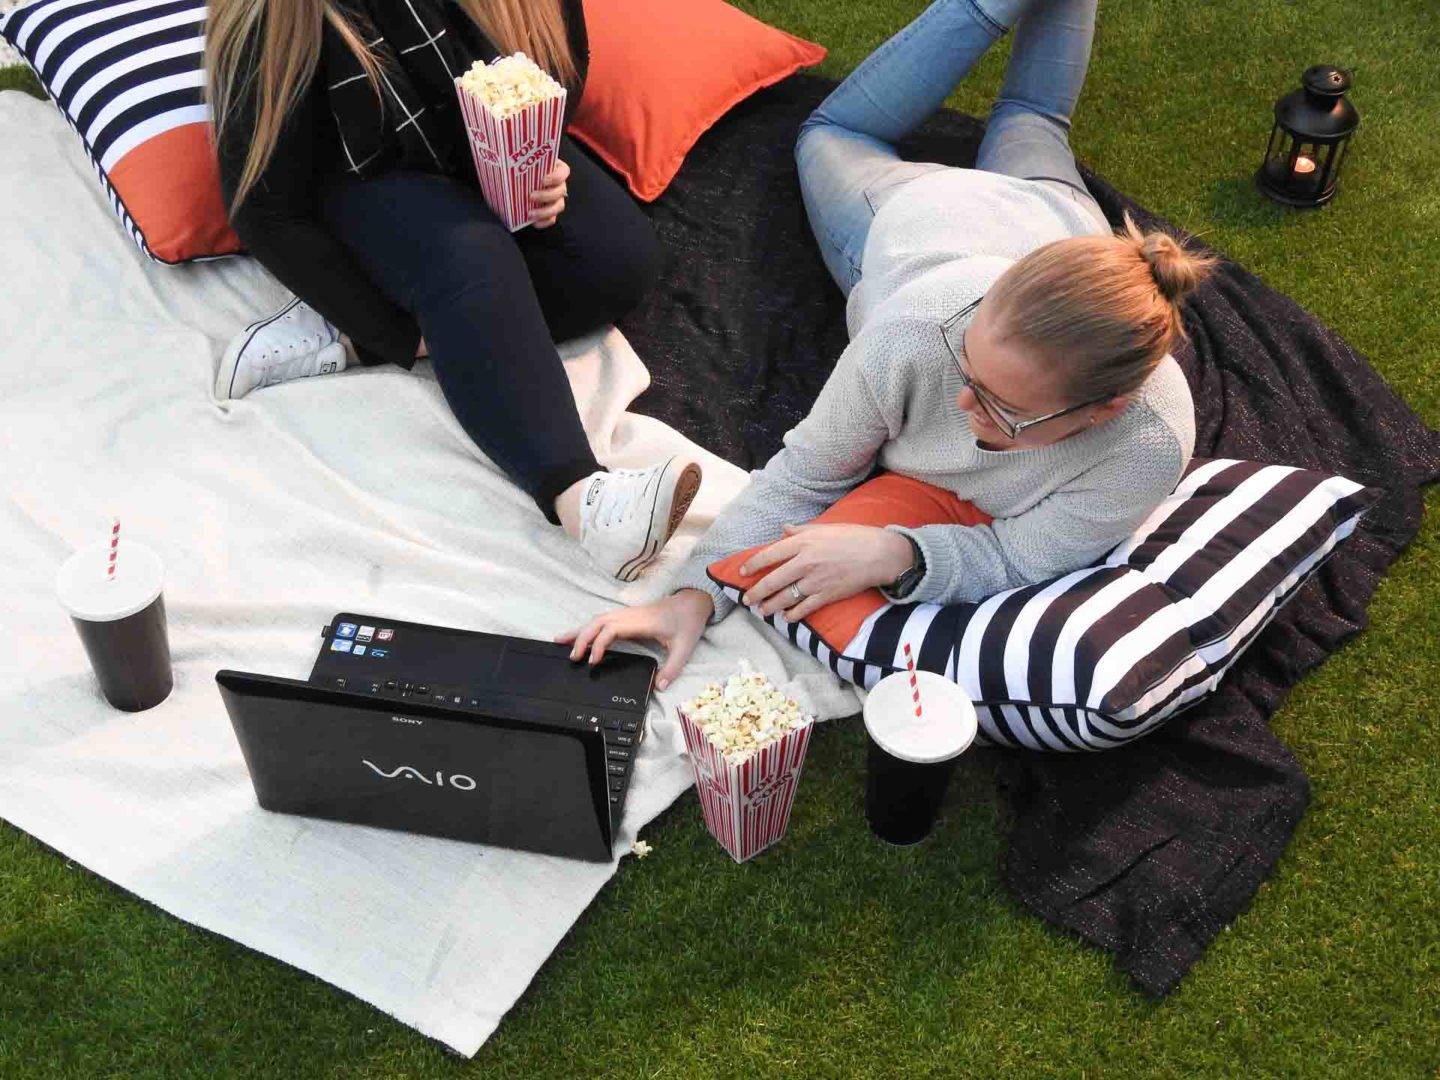 Enjoy a fun-filled camping experience in your back garden - Have a Movie Night in Your Backyard, Australian Outdoor Living.